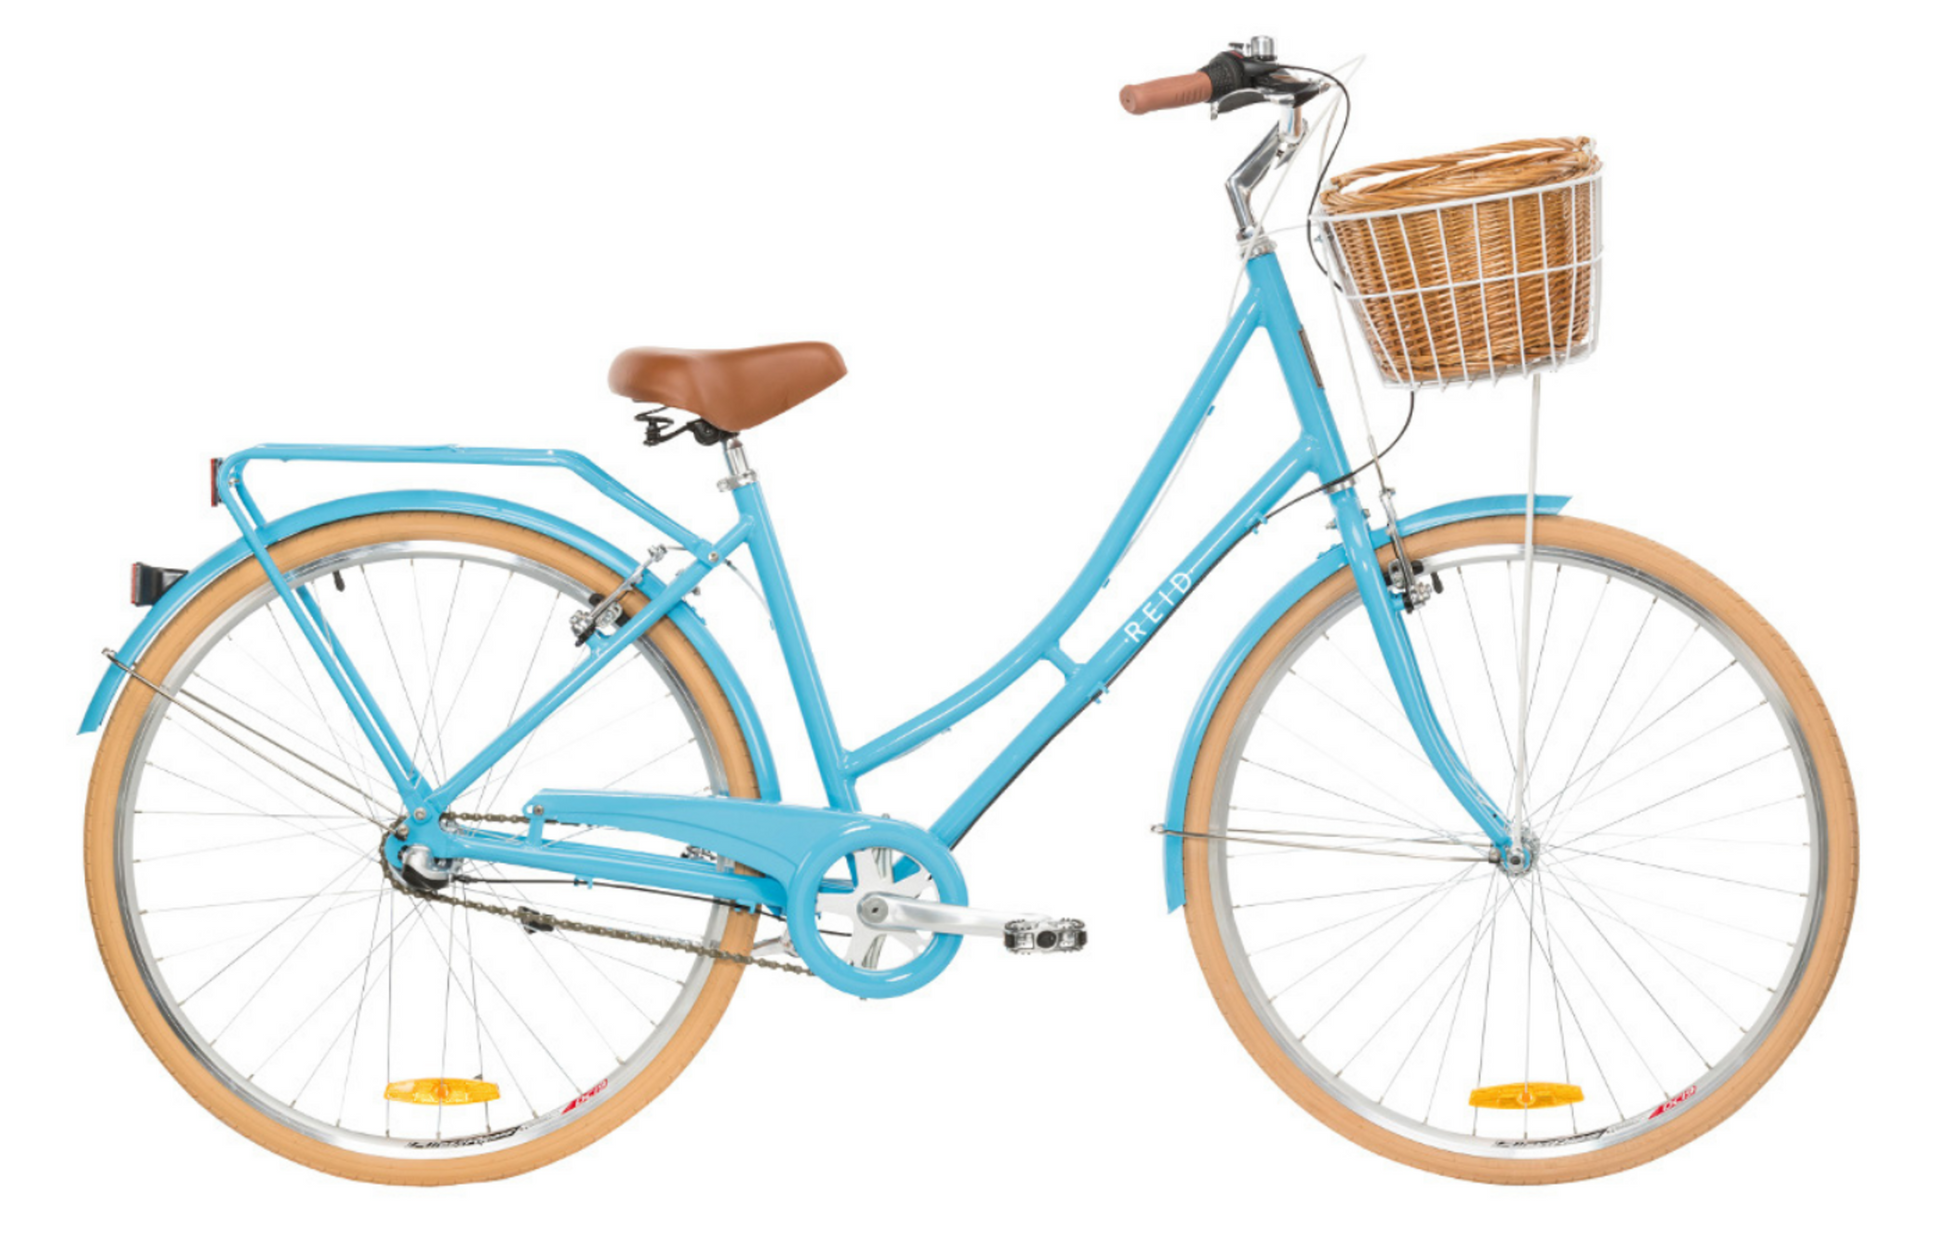 Ladies Deluxe Vintage Bike in Baby Blue with 3-speed Shimano gearing from Reid Cycles Australia